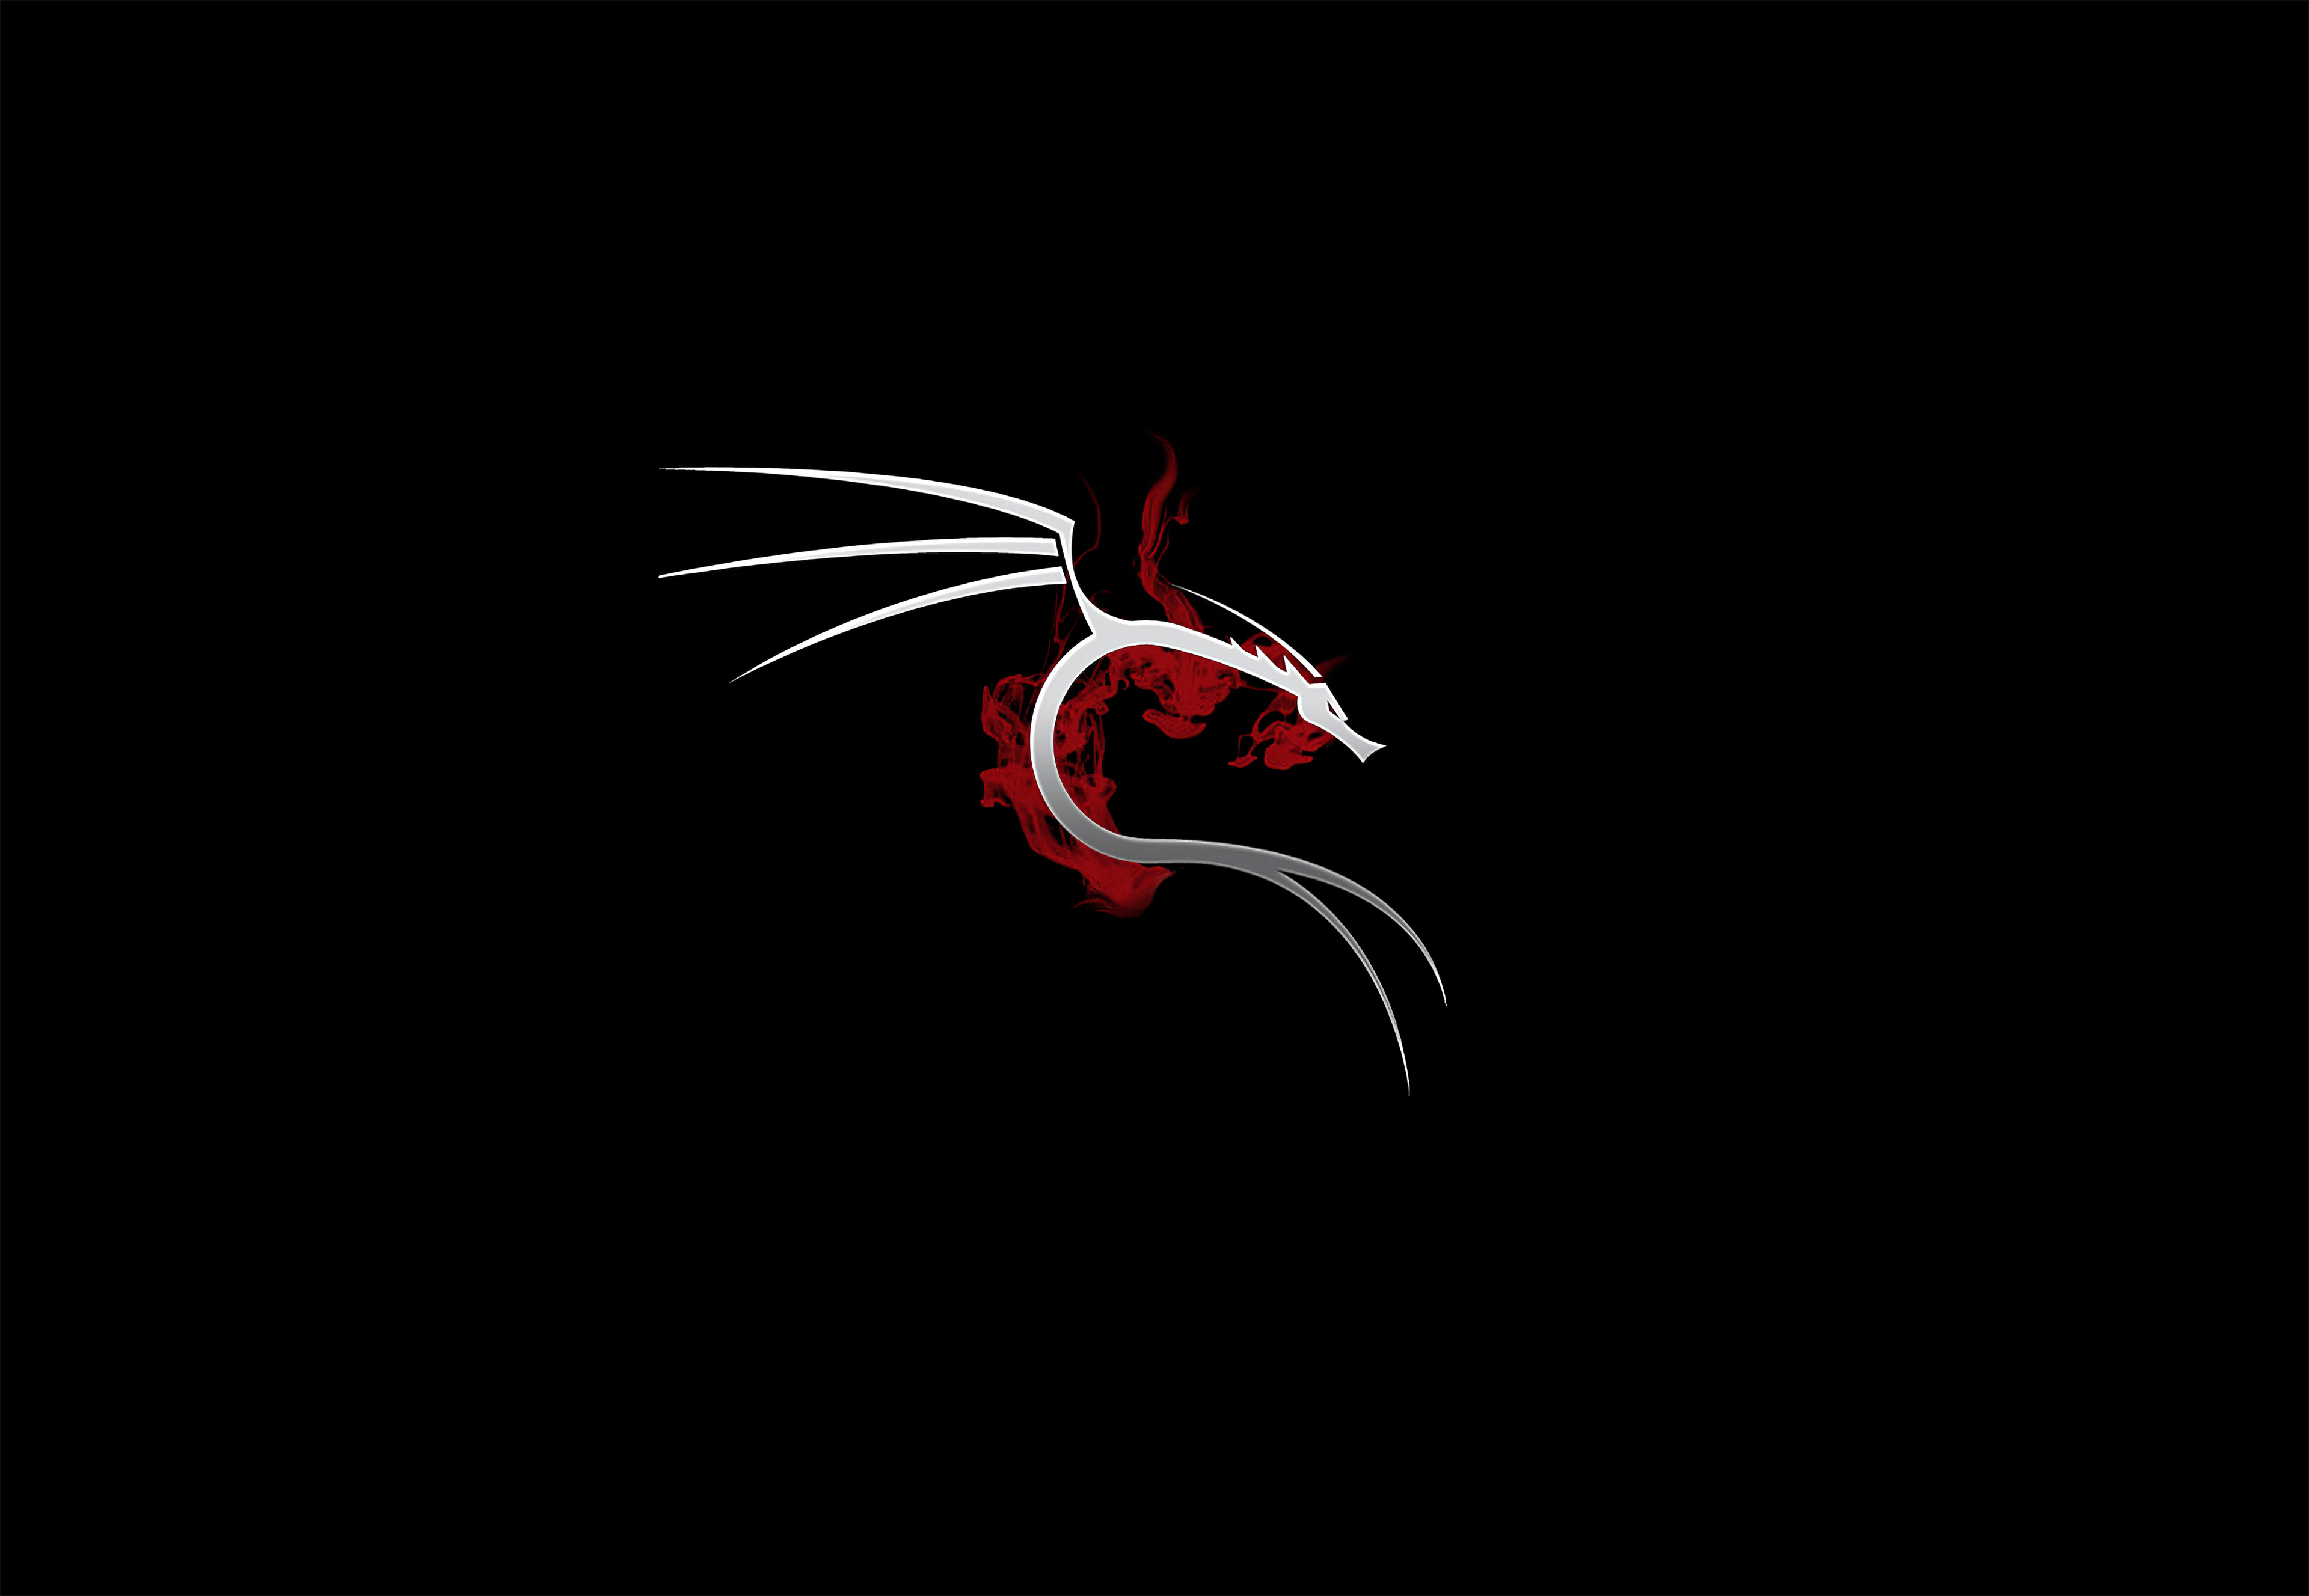 2560x1440 Kali Linux 4k 1440p Resolution Hd 4k Wallpapers Images